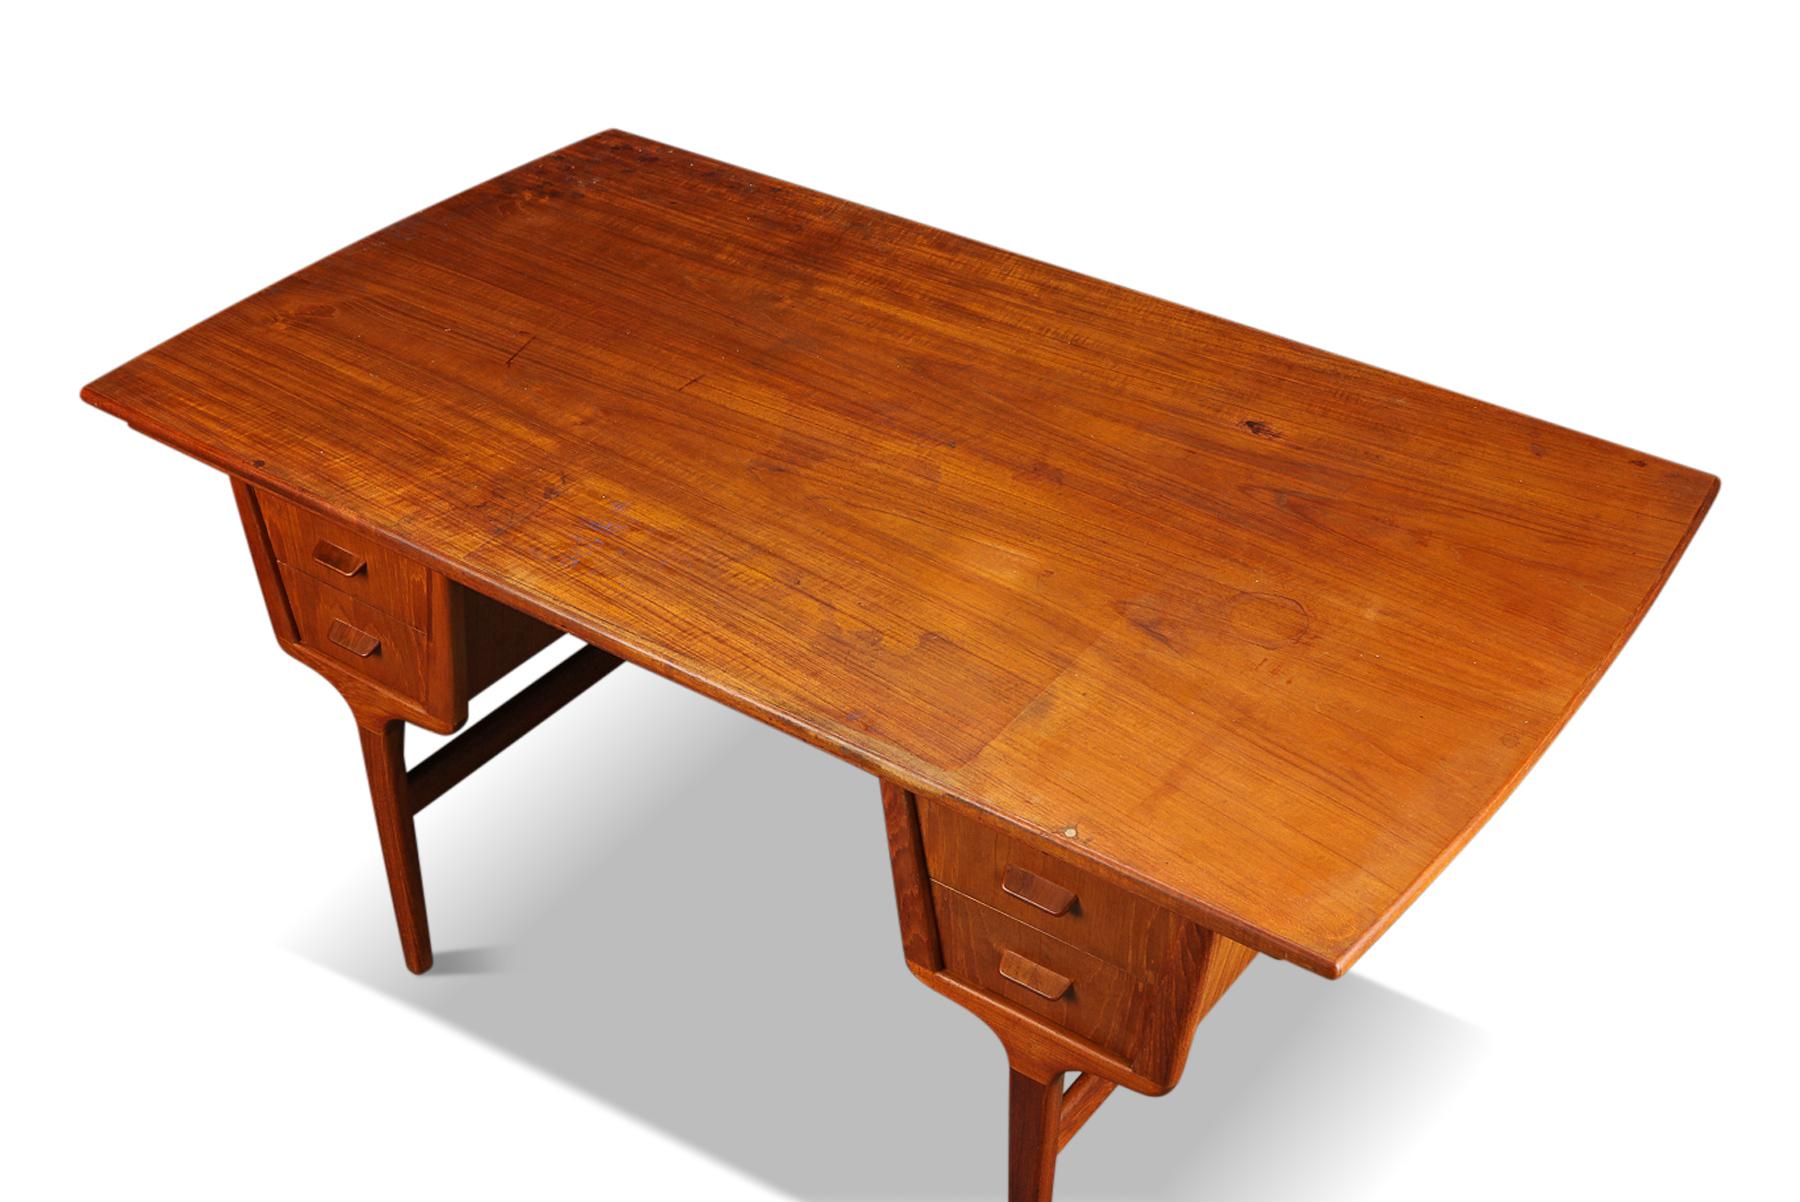 Origin: Denmark
Designer: Unknown
Manufacturer: Unknown
Era: 1950s
Materials: Teak
Measurements: 59? wide x 33? deep (leaves in), 63? deep (leaves out) x 29.5? tall

Condition: In good original condition with some cosmetic wear (will be